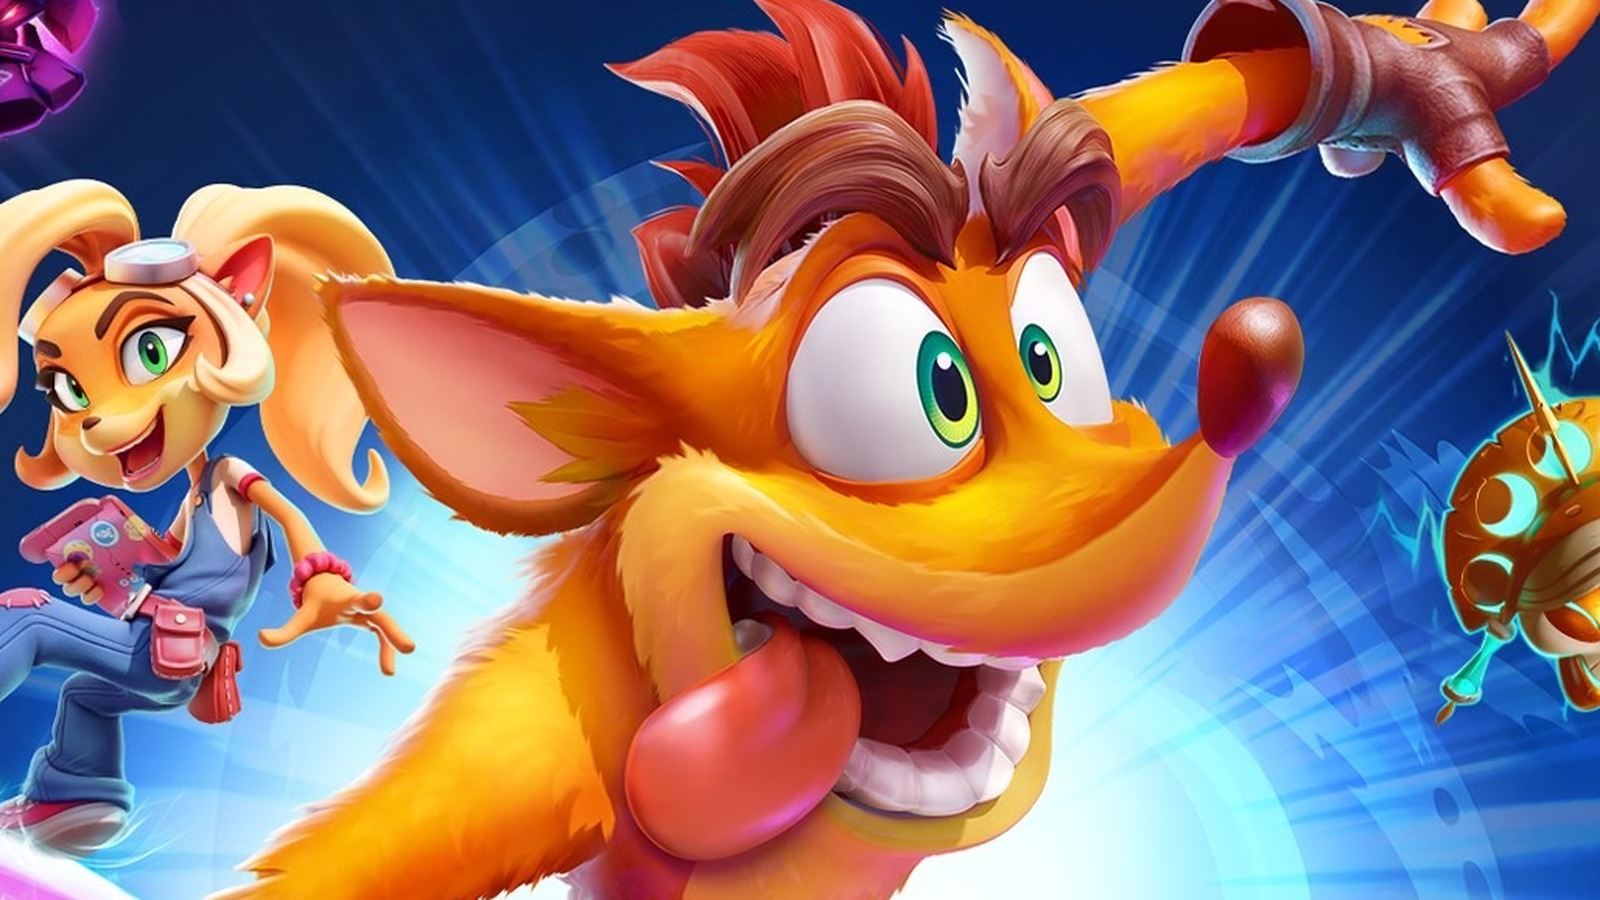 Activision Announces New Additions Coming To Crash Bandicoot 4